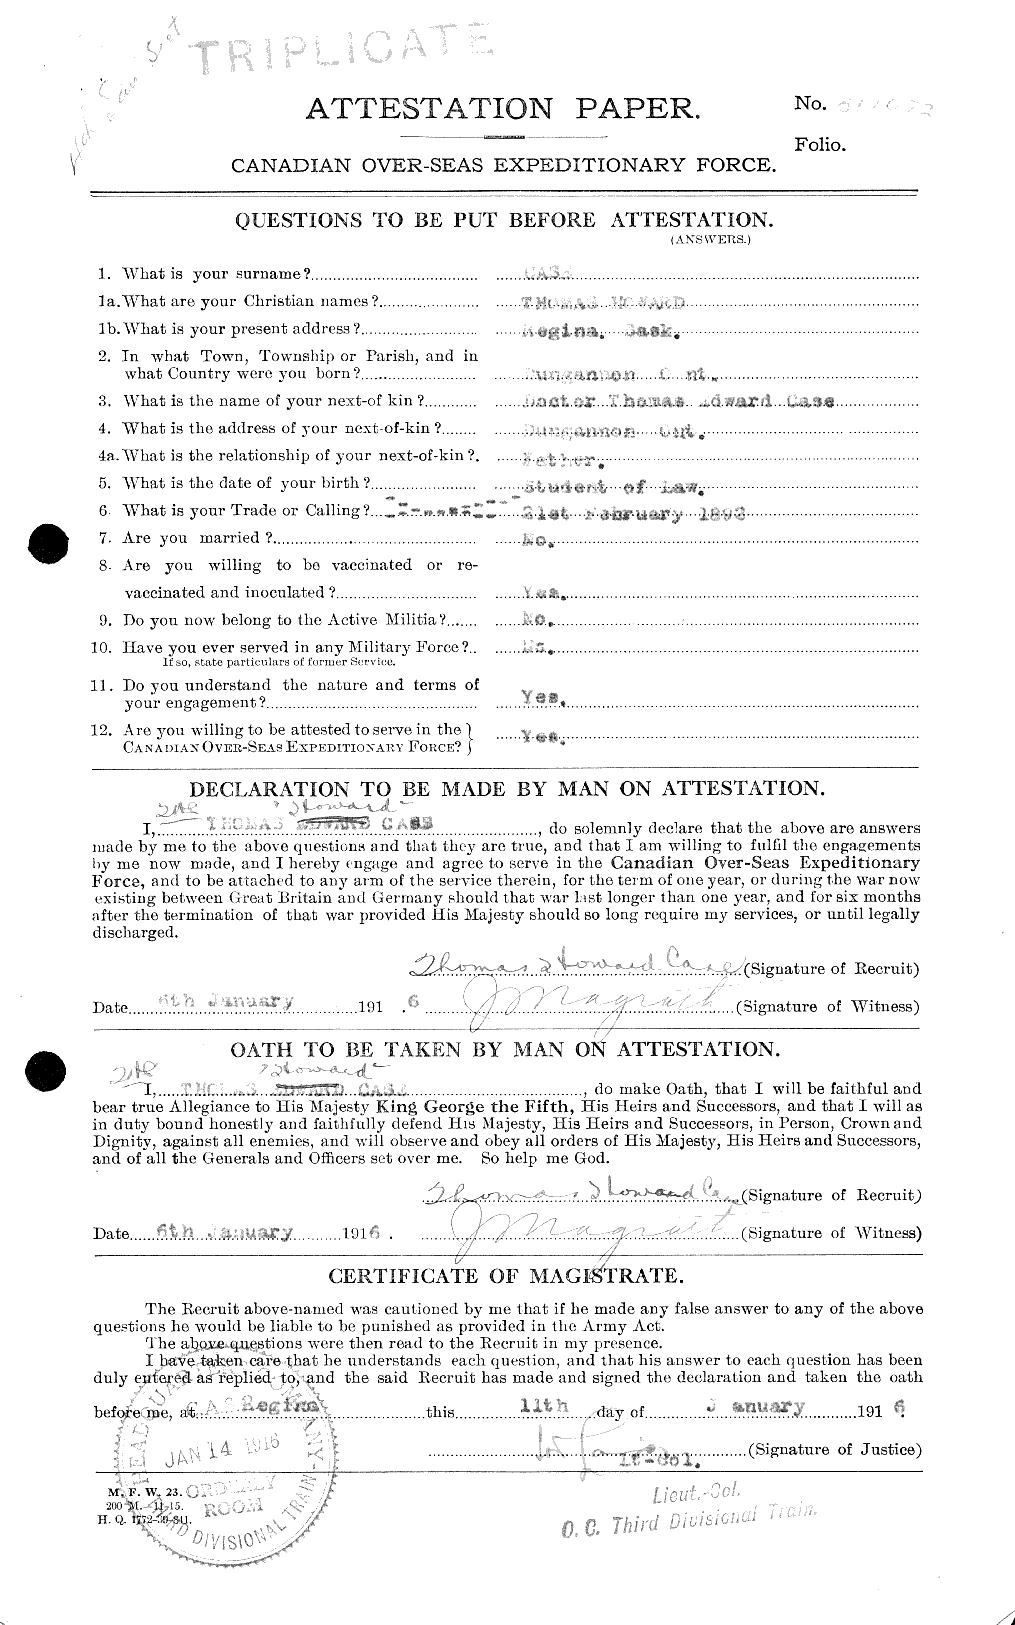 Personnel Records of the First World War - CEF 012732a